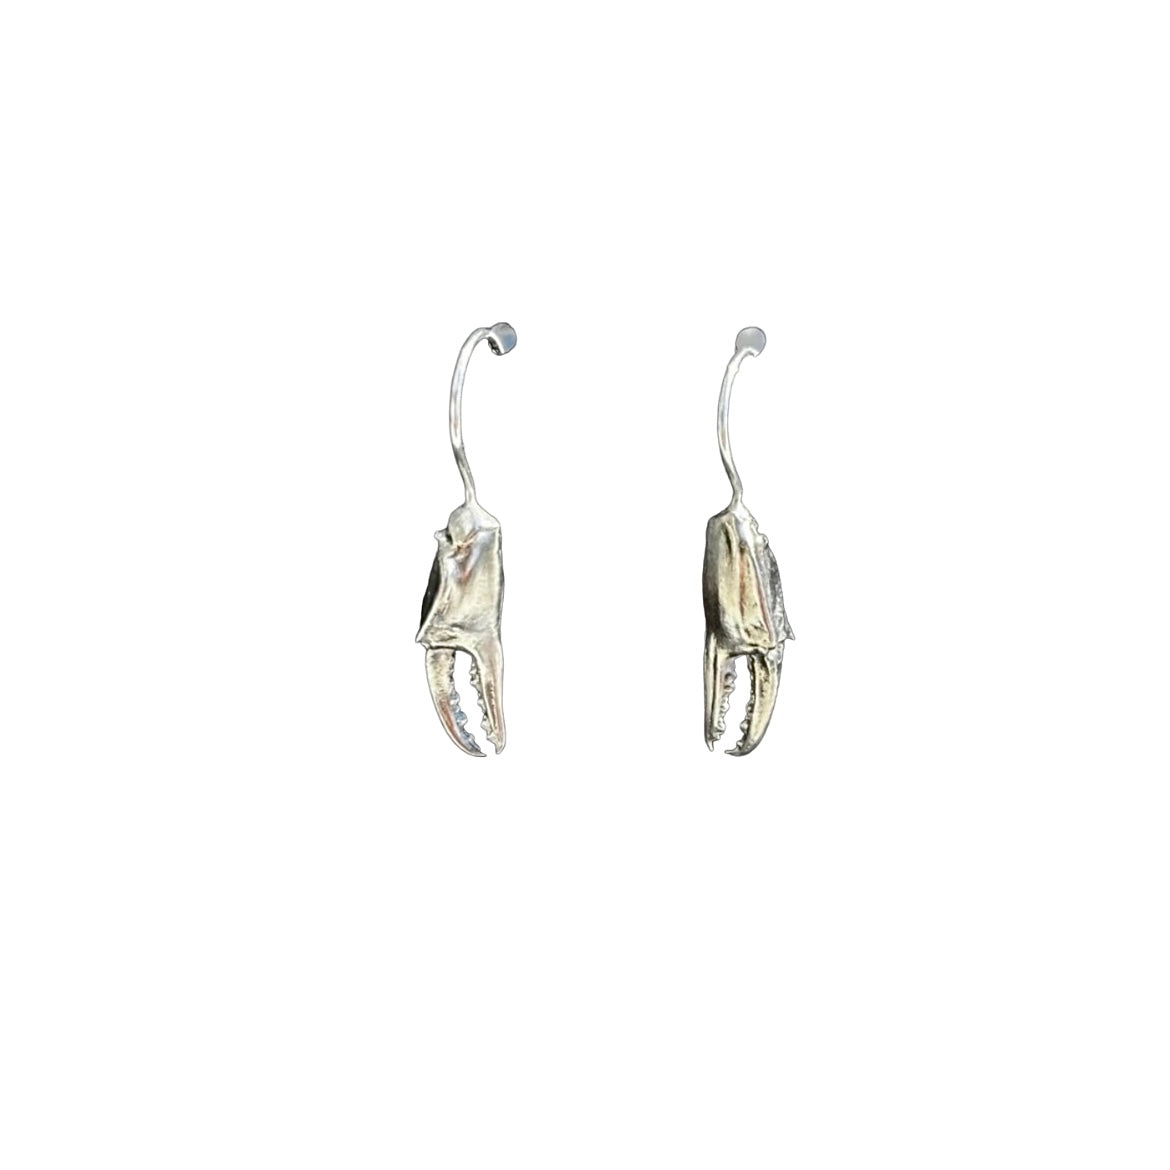 Lil Crab Claw Earrings in Sterling